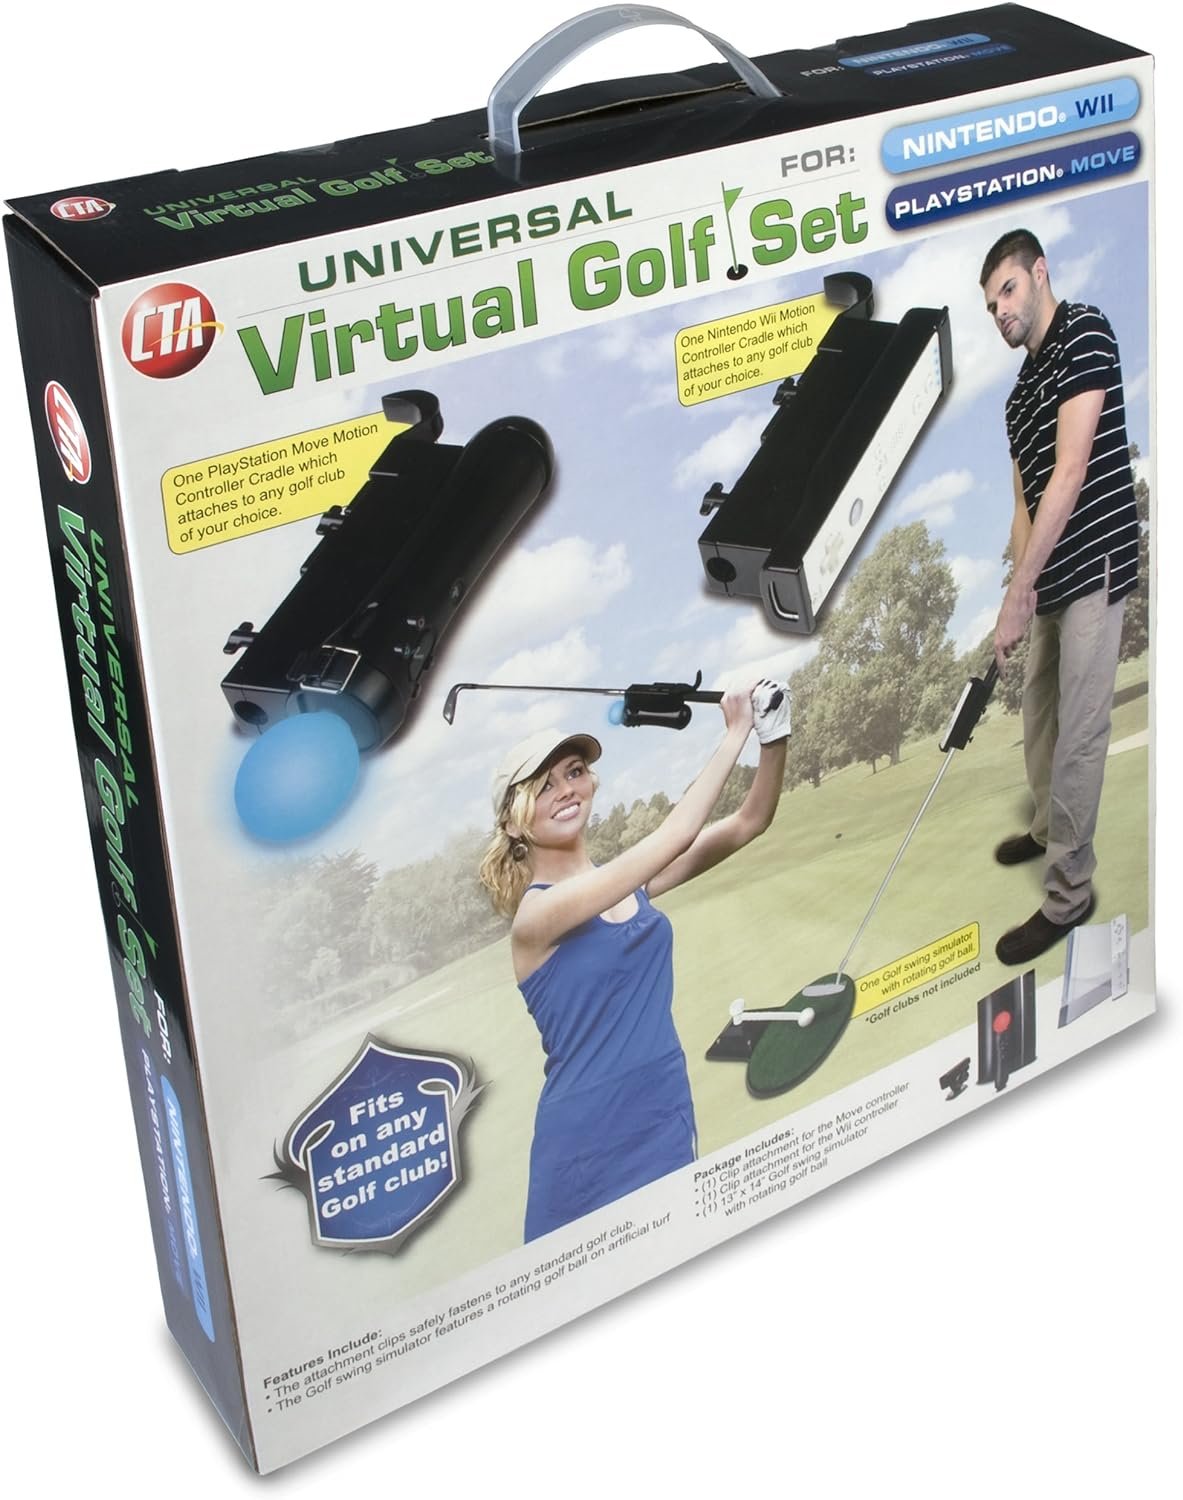 Universal Virtual Golf Set for PlayStation Move and Nintendo Wii